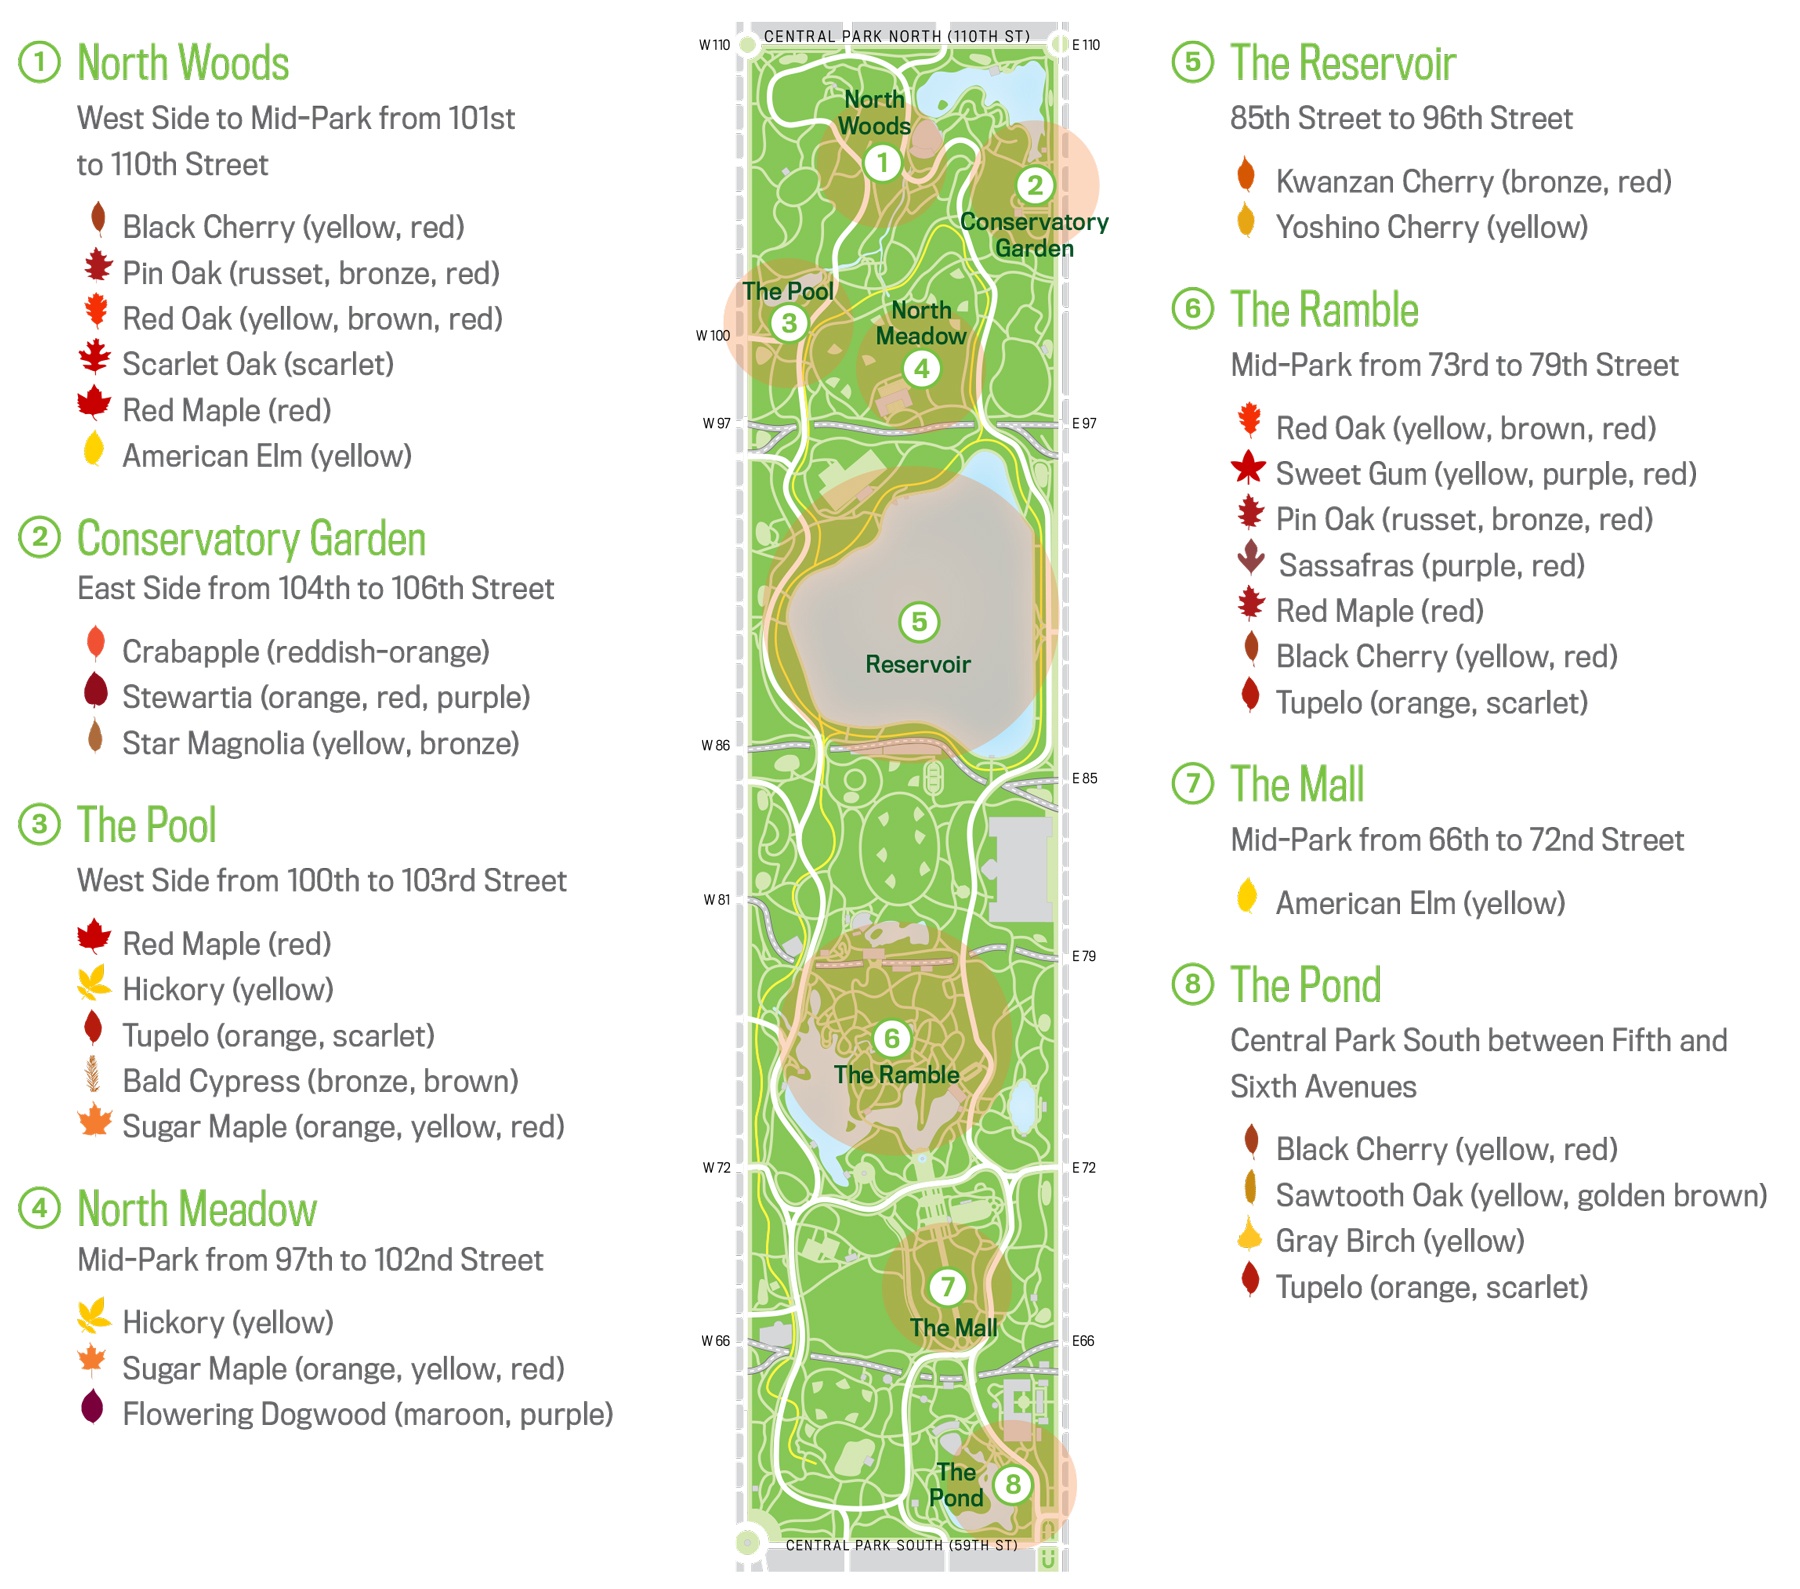 central park nyc map Fun Maps Central Park Conservancy Creates Nyc Fall Foliage Map